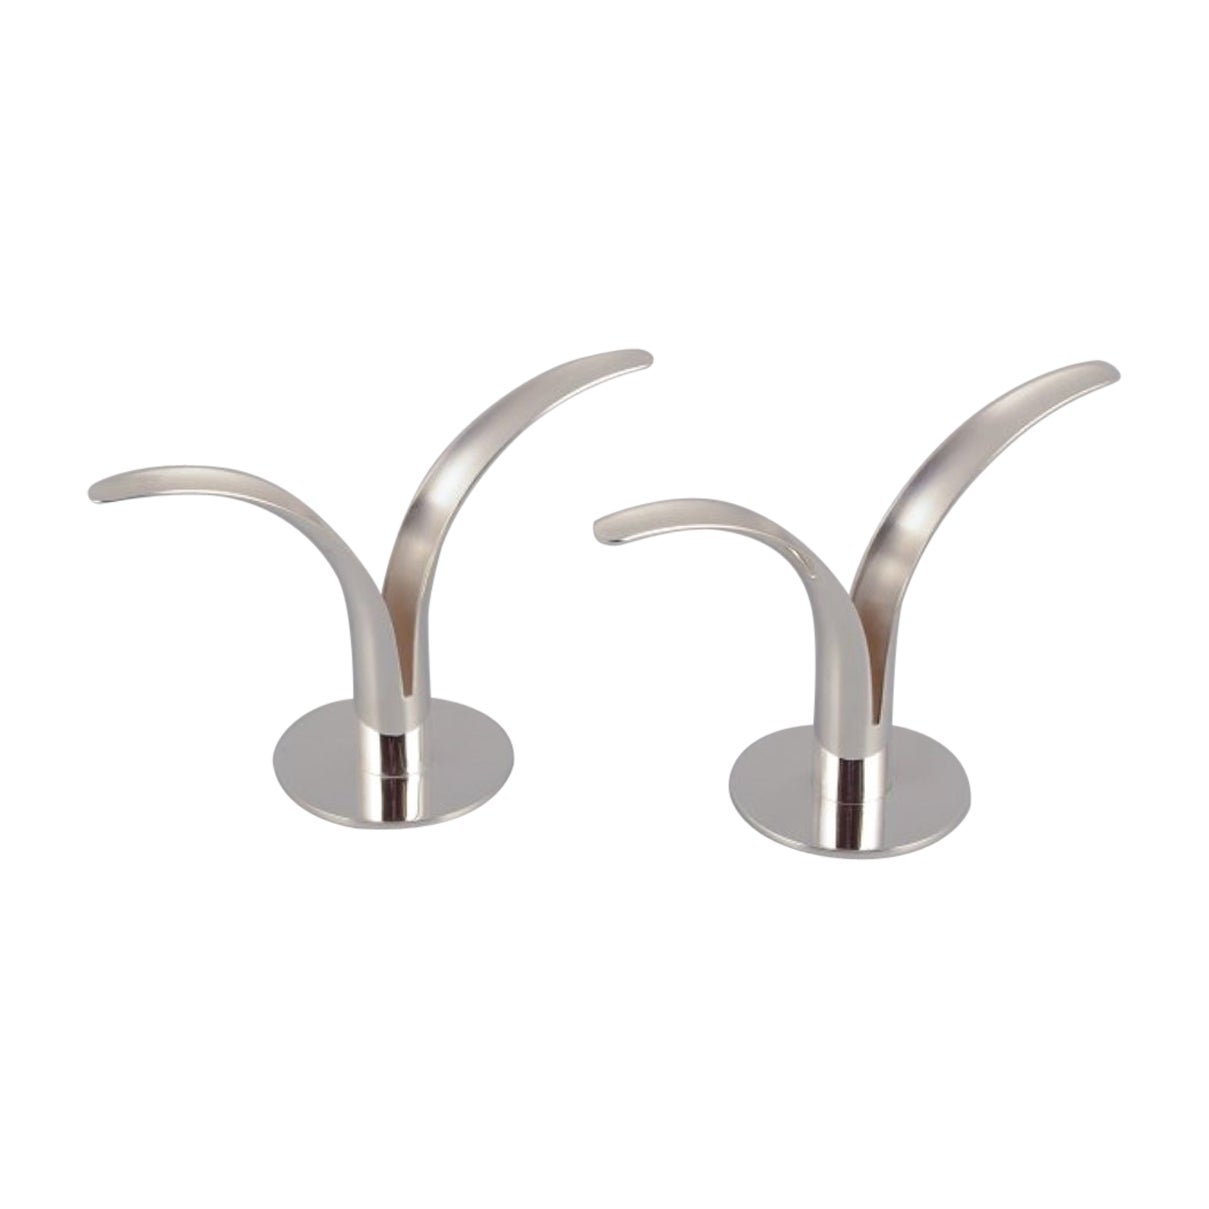  Skultuna, a pair of "Liljan" (Lilly) candle holders in plated silver.  For Sale